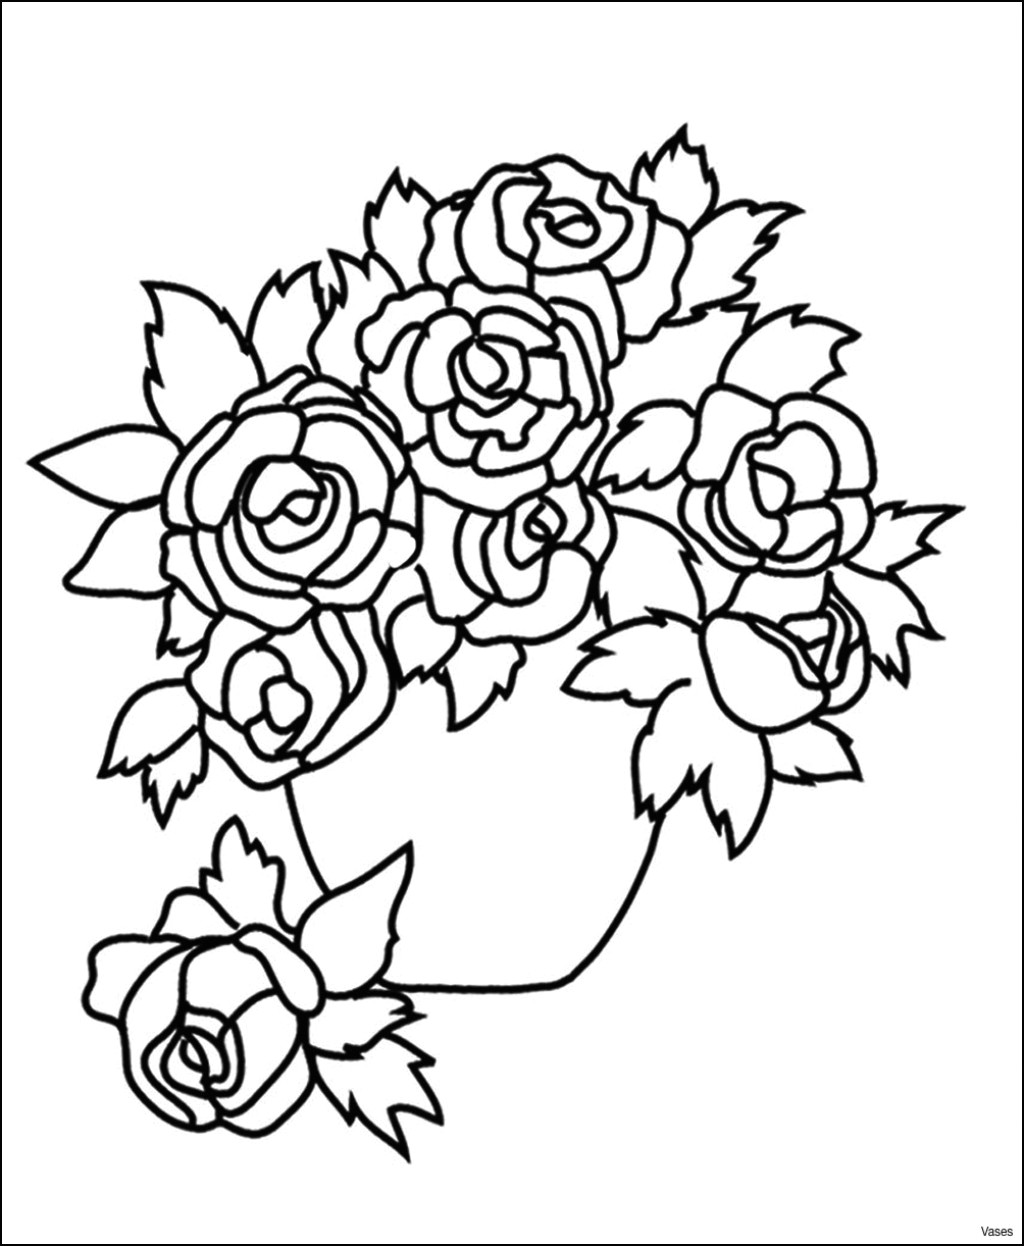 garden art best of best vases flower vase coloring page pages flowers in a top i